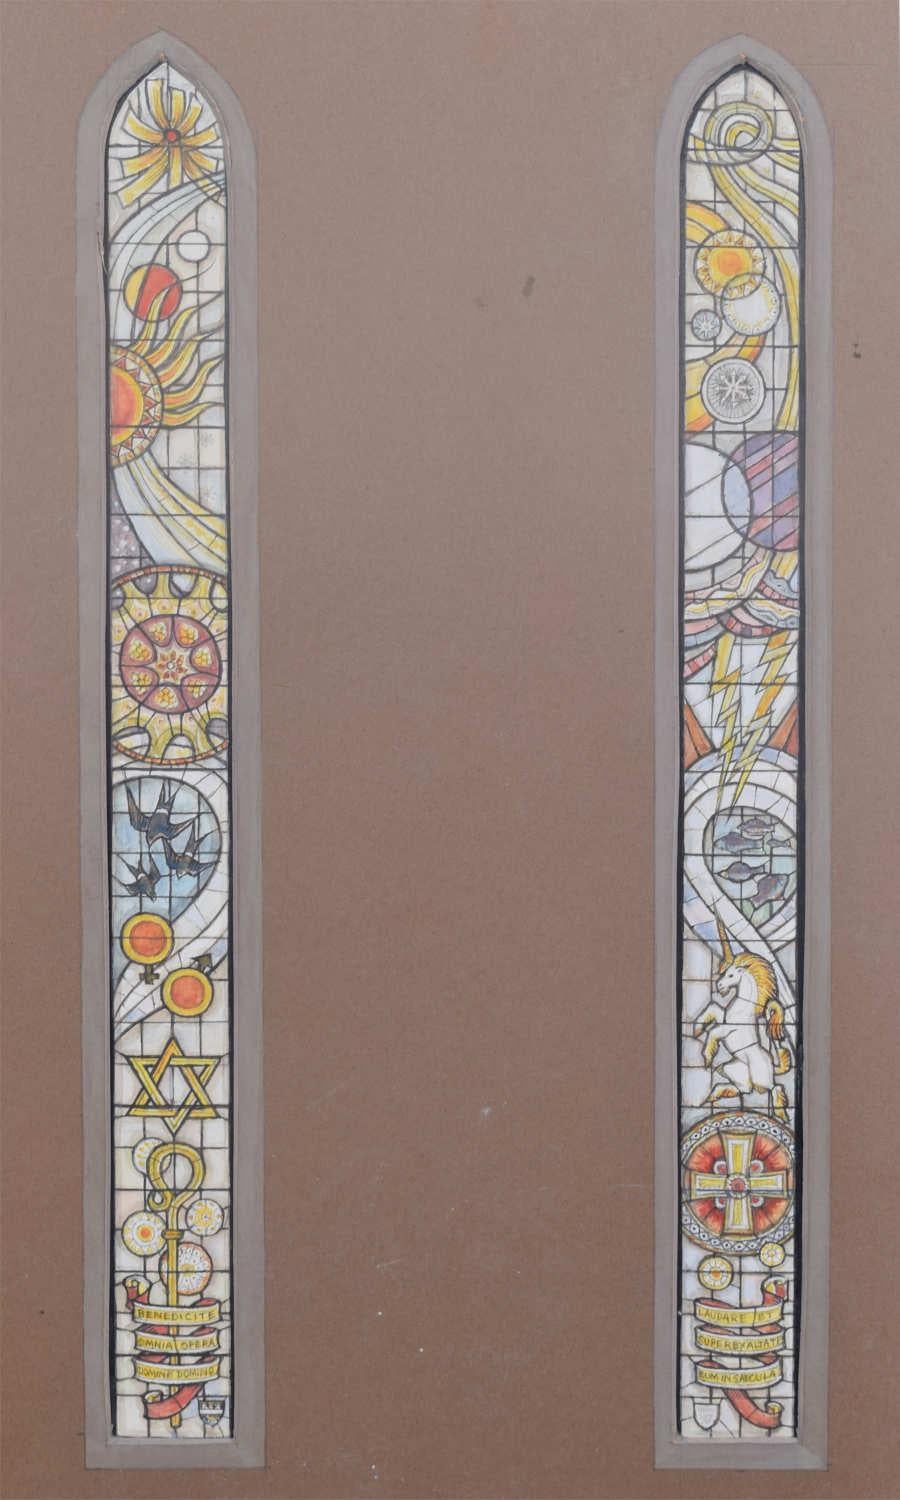 We acquired a series of watercolour stained glass designs from Jane Gray's studio. To find more scroll down to "More from this Seller" and below it click on "See all from this seller." 

Jane Gray (b.1931)
Stained Glass Design
Watercolour
32.5 x 8